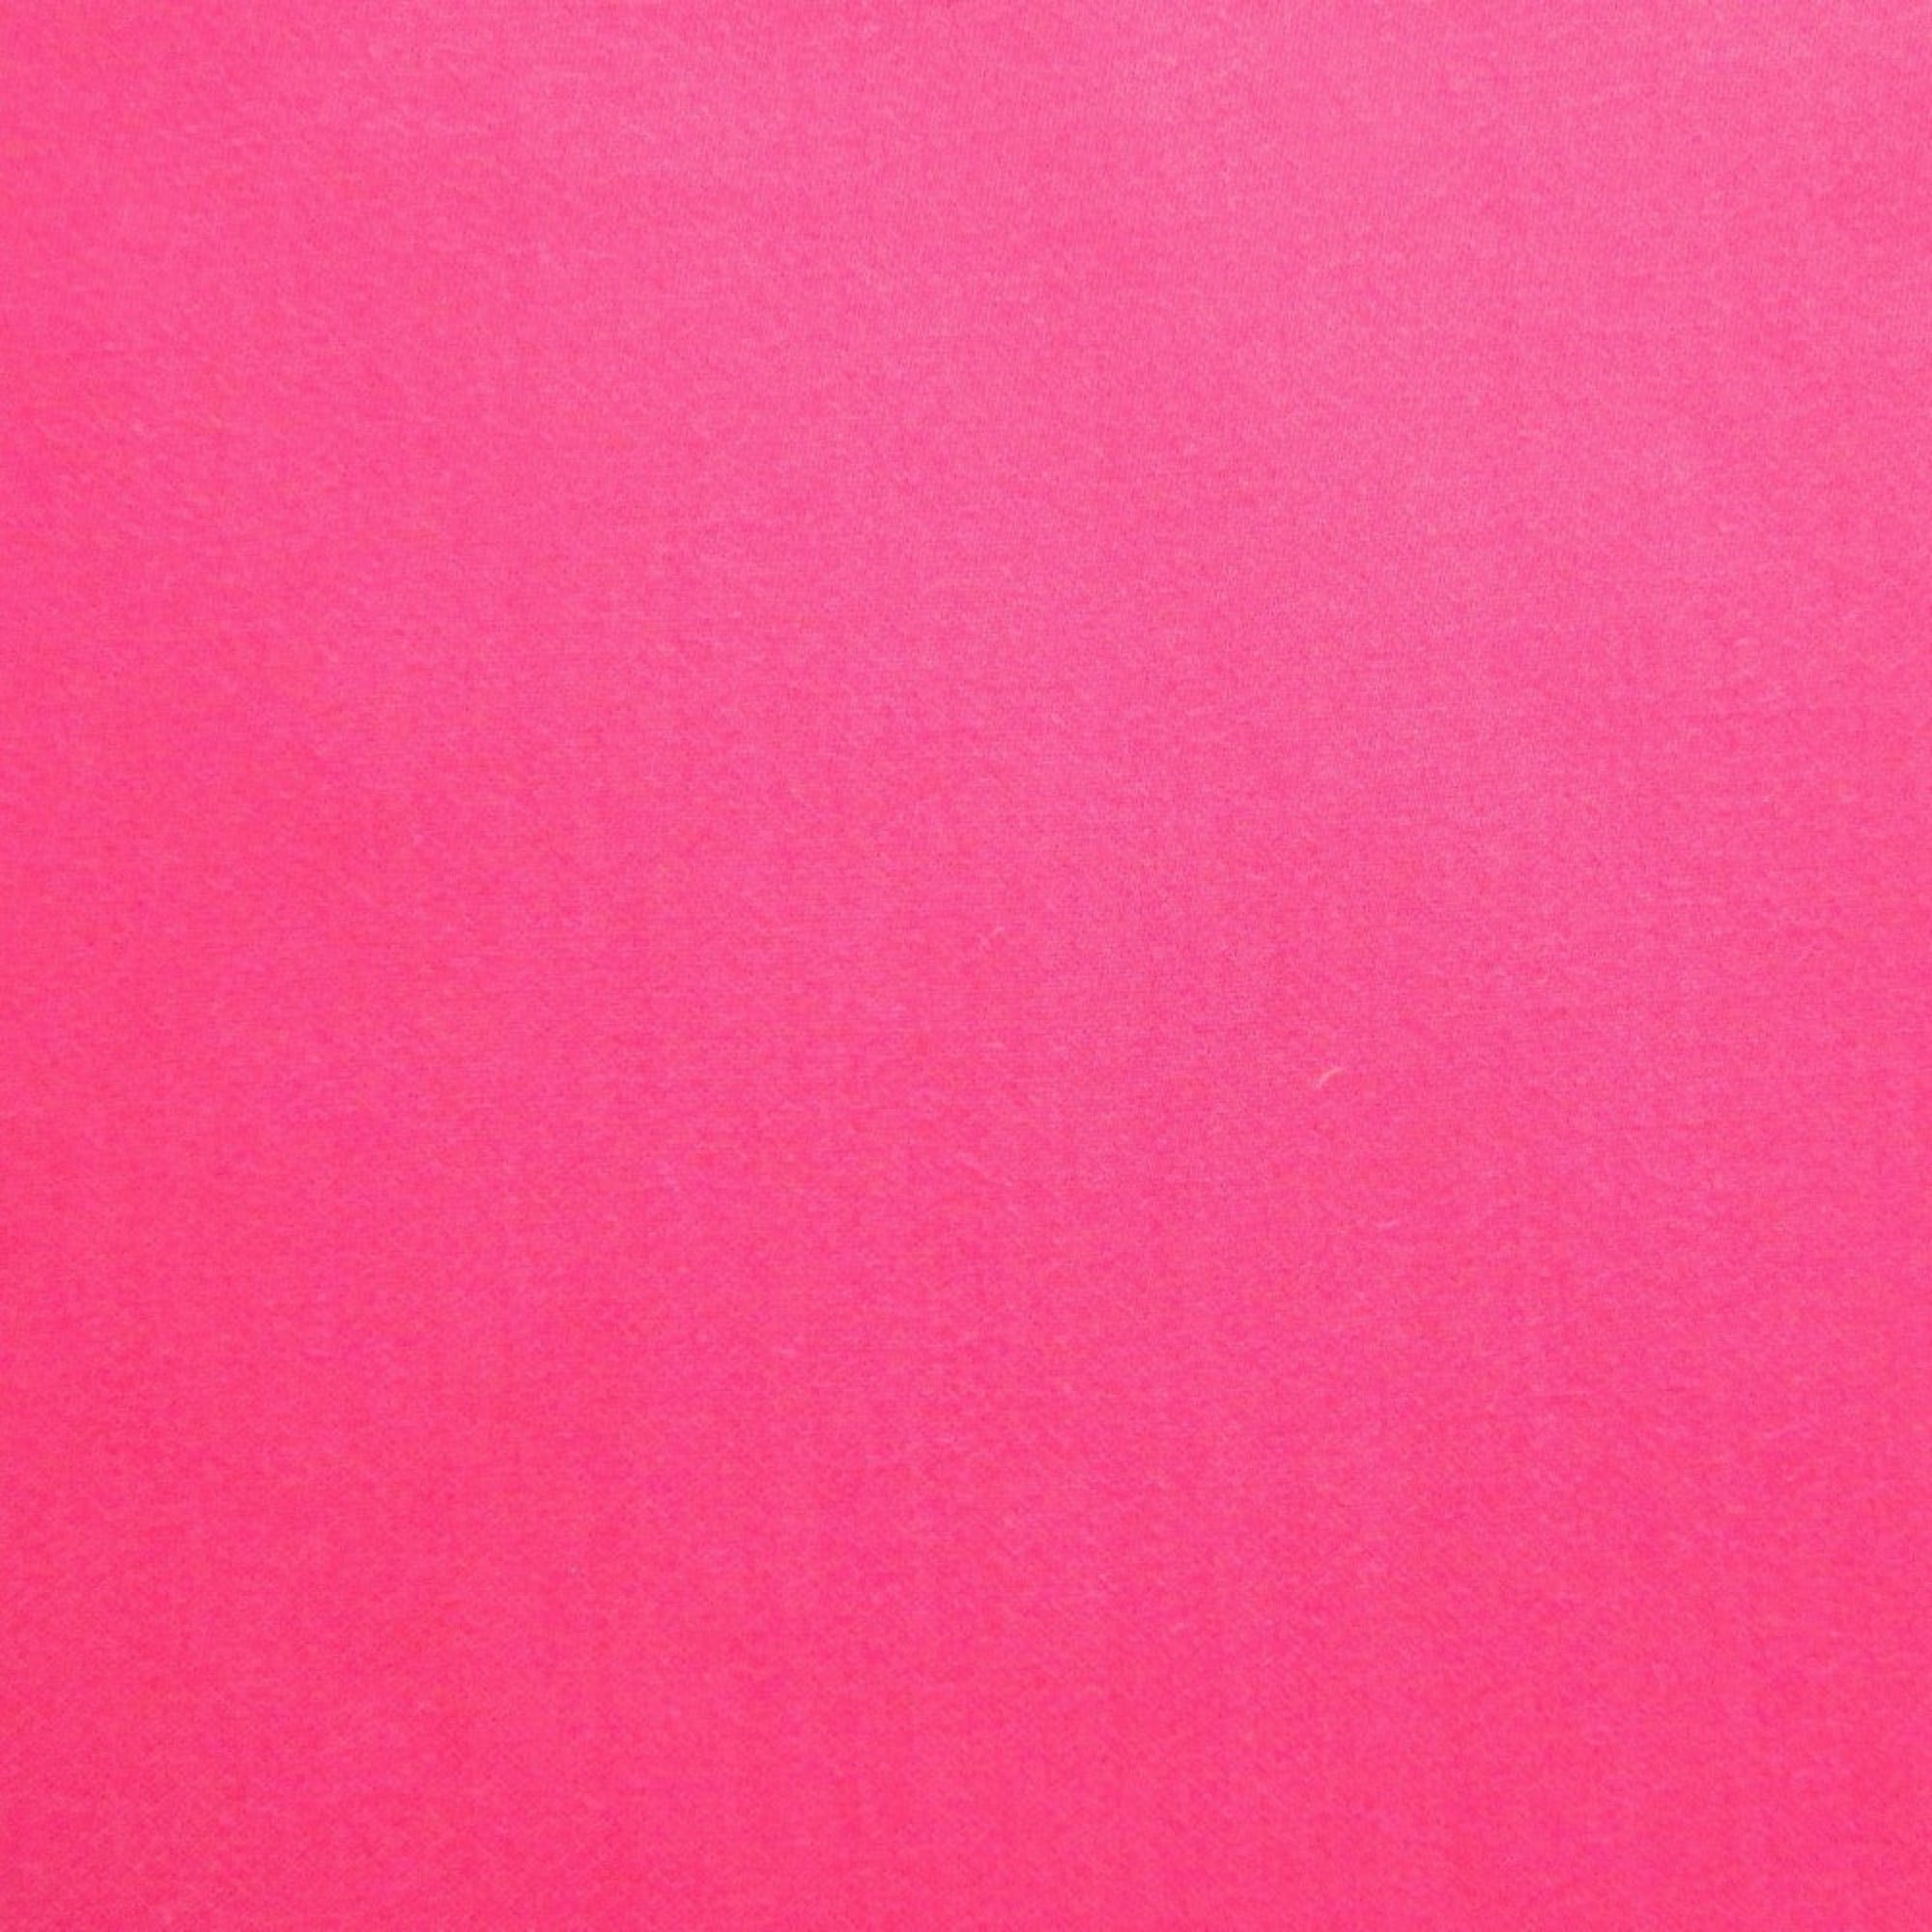 Home Treasures Royal Sateen Bedding Swatch Bright Pink Fine Linens